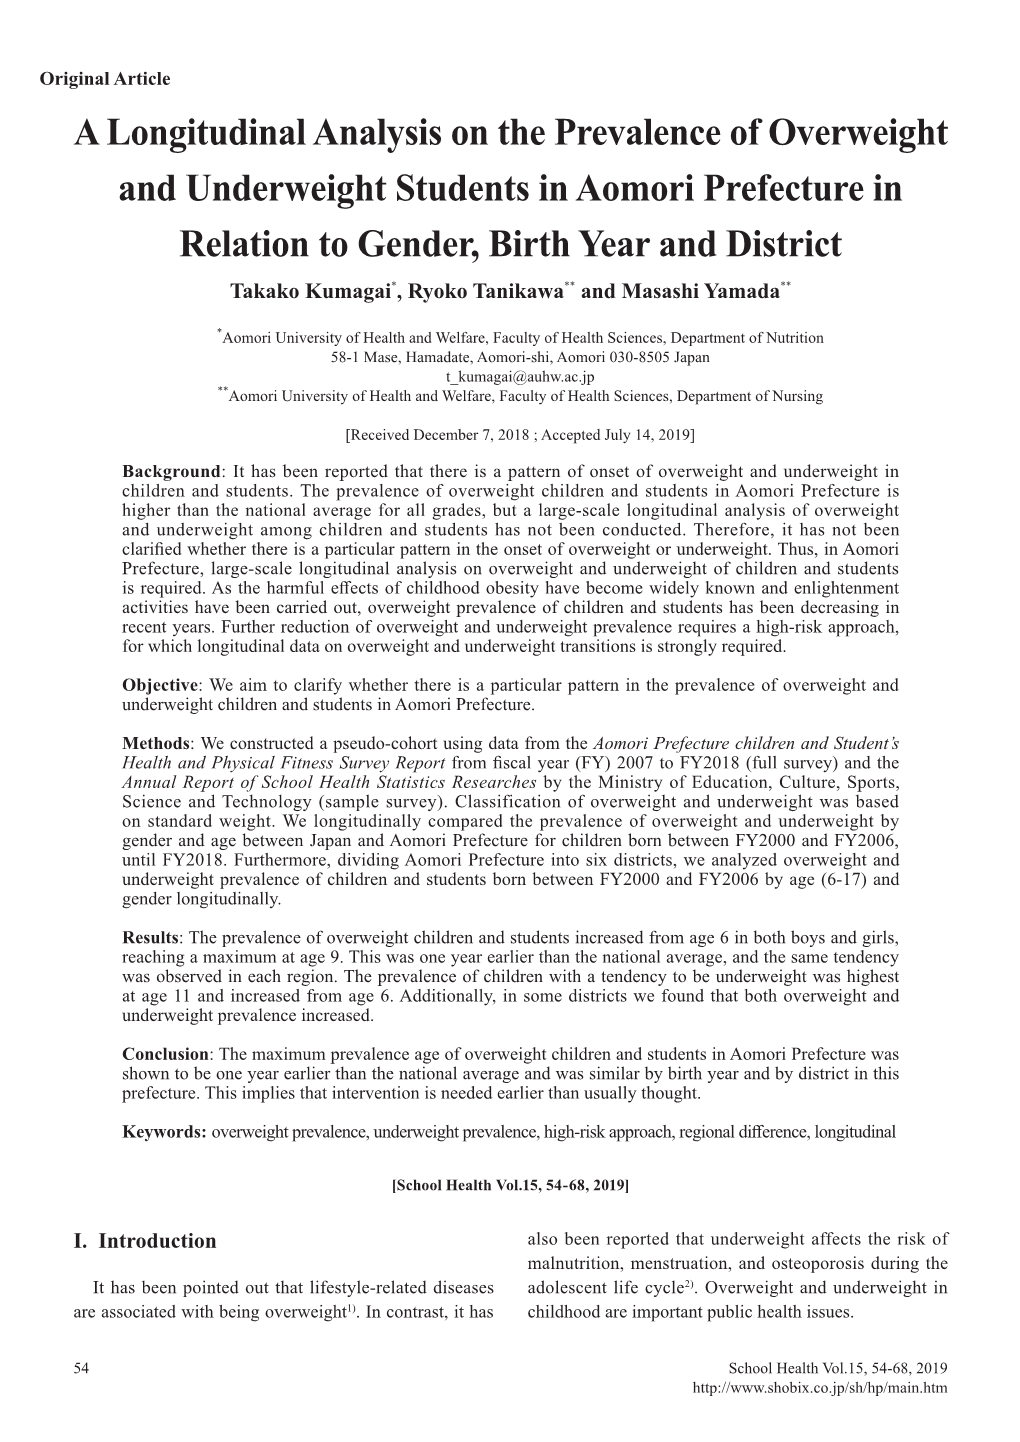 A Longitudinal Analysis on the Prevalence of Overweight and Underweight Students in Aomori Prefecture in Relation to Gender, Birth Year and District